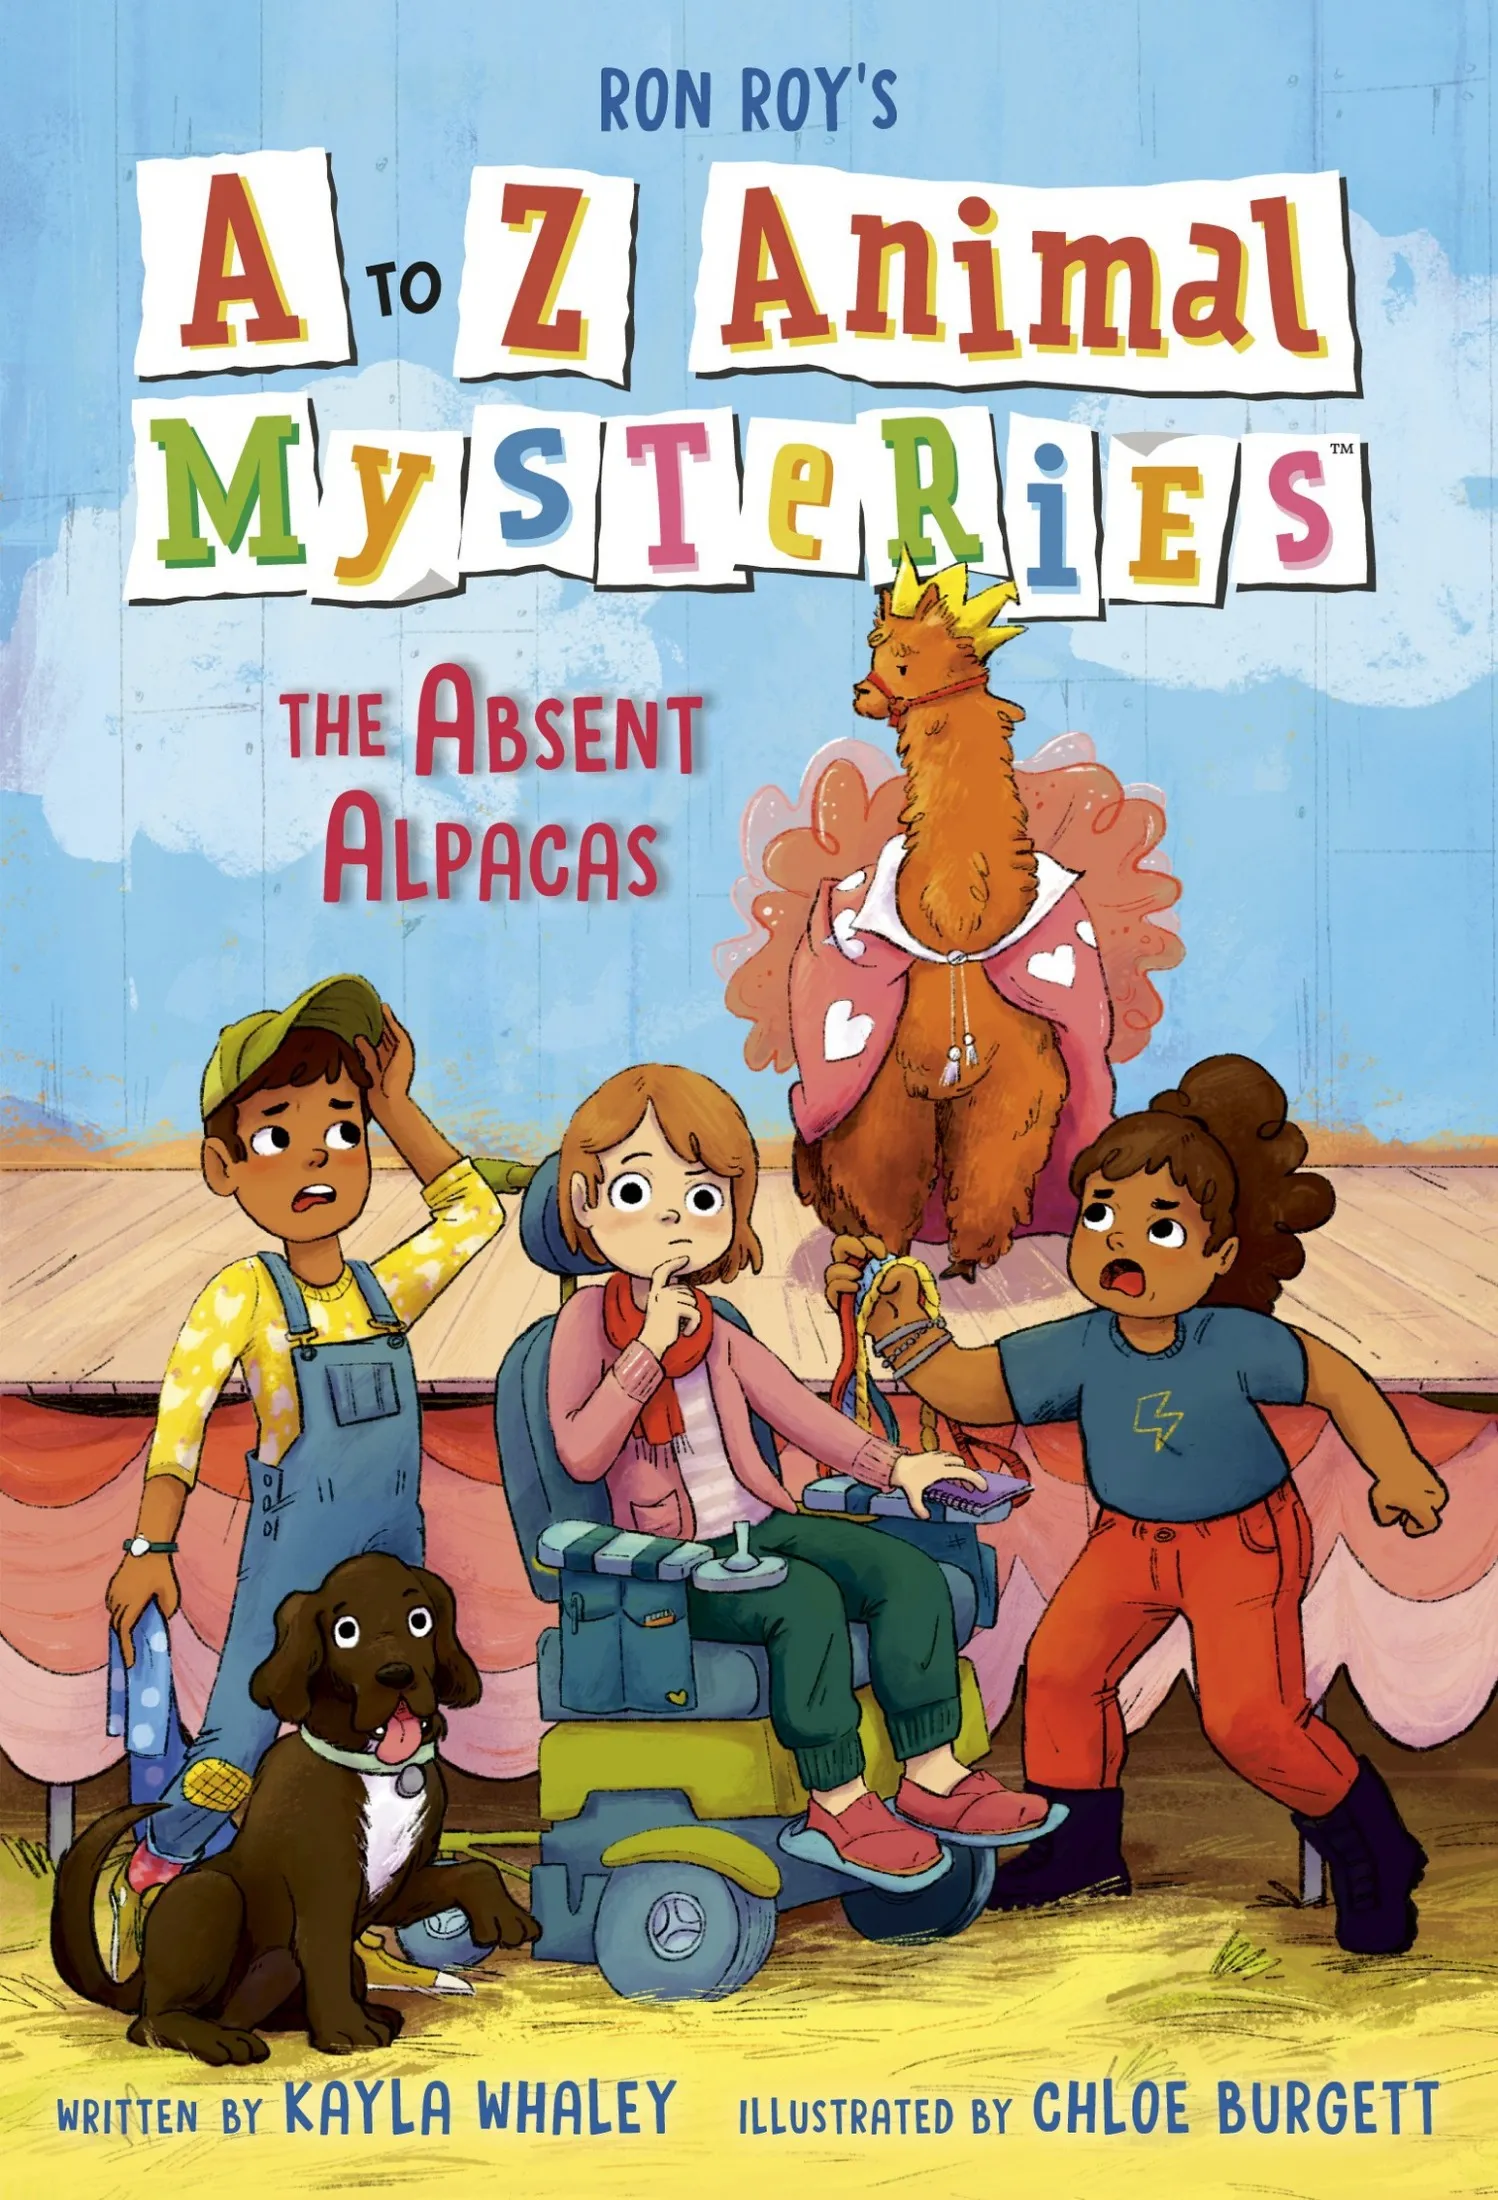 The Absent Alpacas (A to Z Animal Mysteries #1)